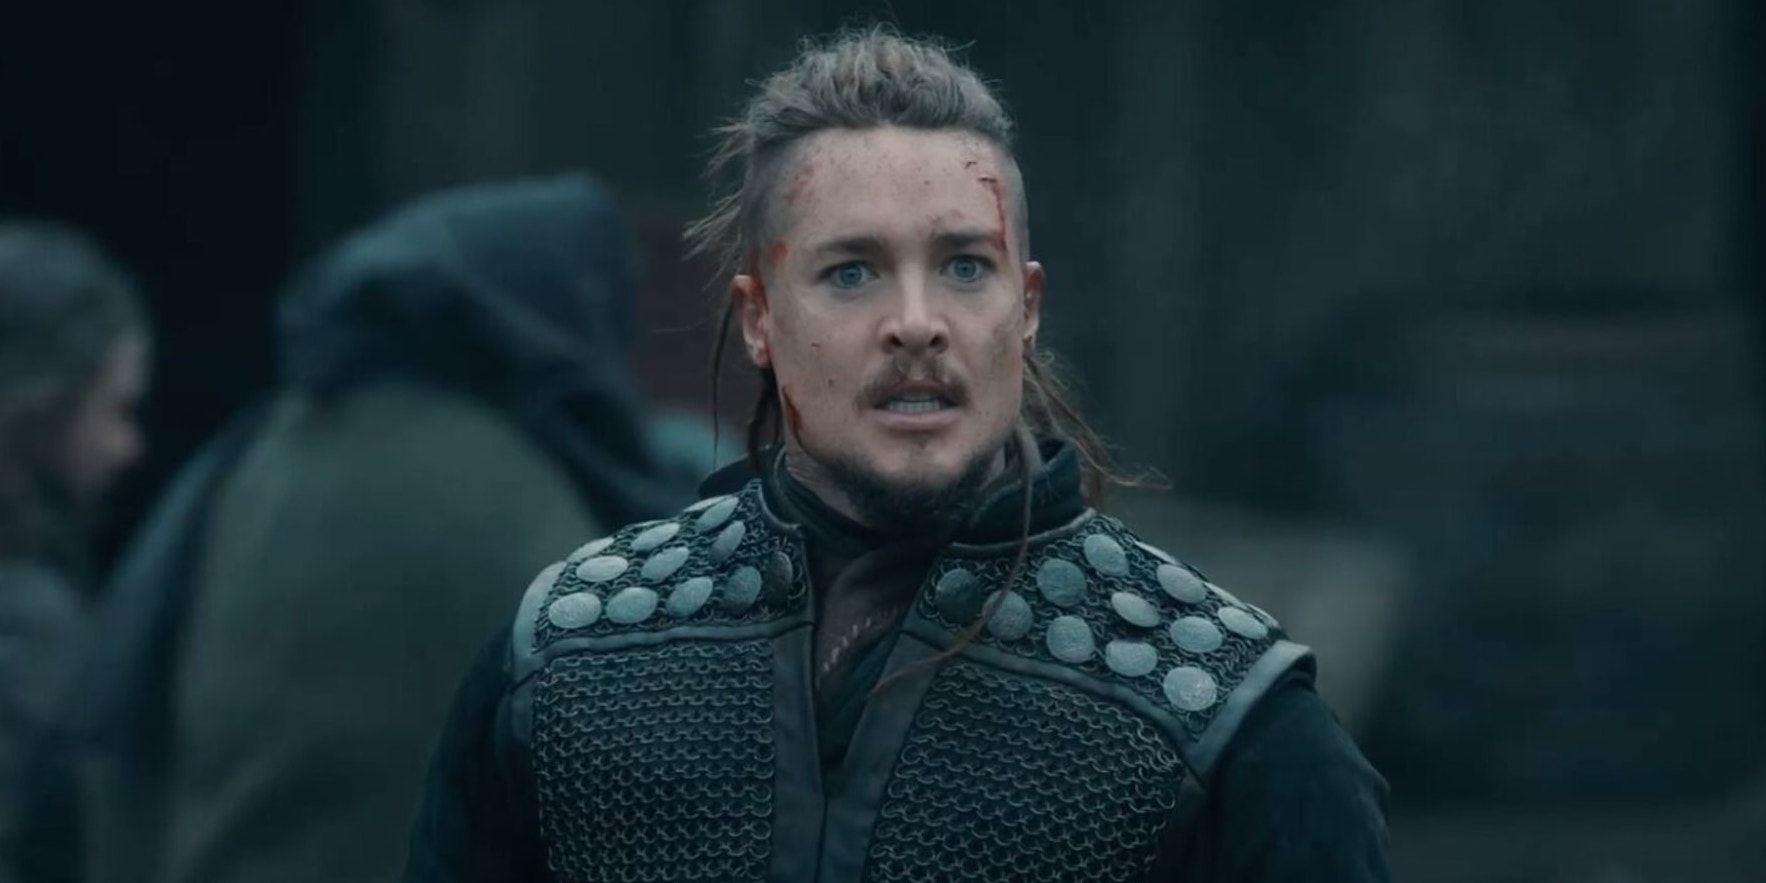 Is this who Uhtred of Bebbanburg is loosely based on? : r/TheLastKingdom